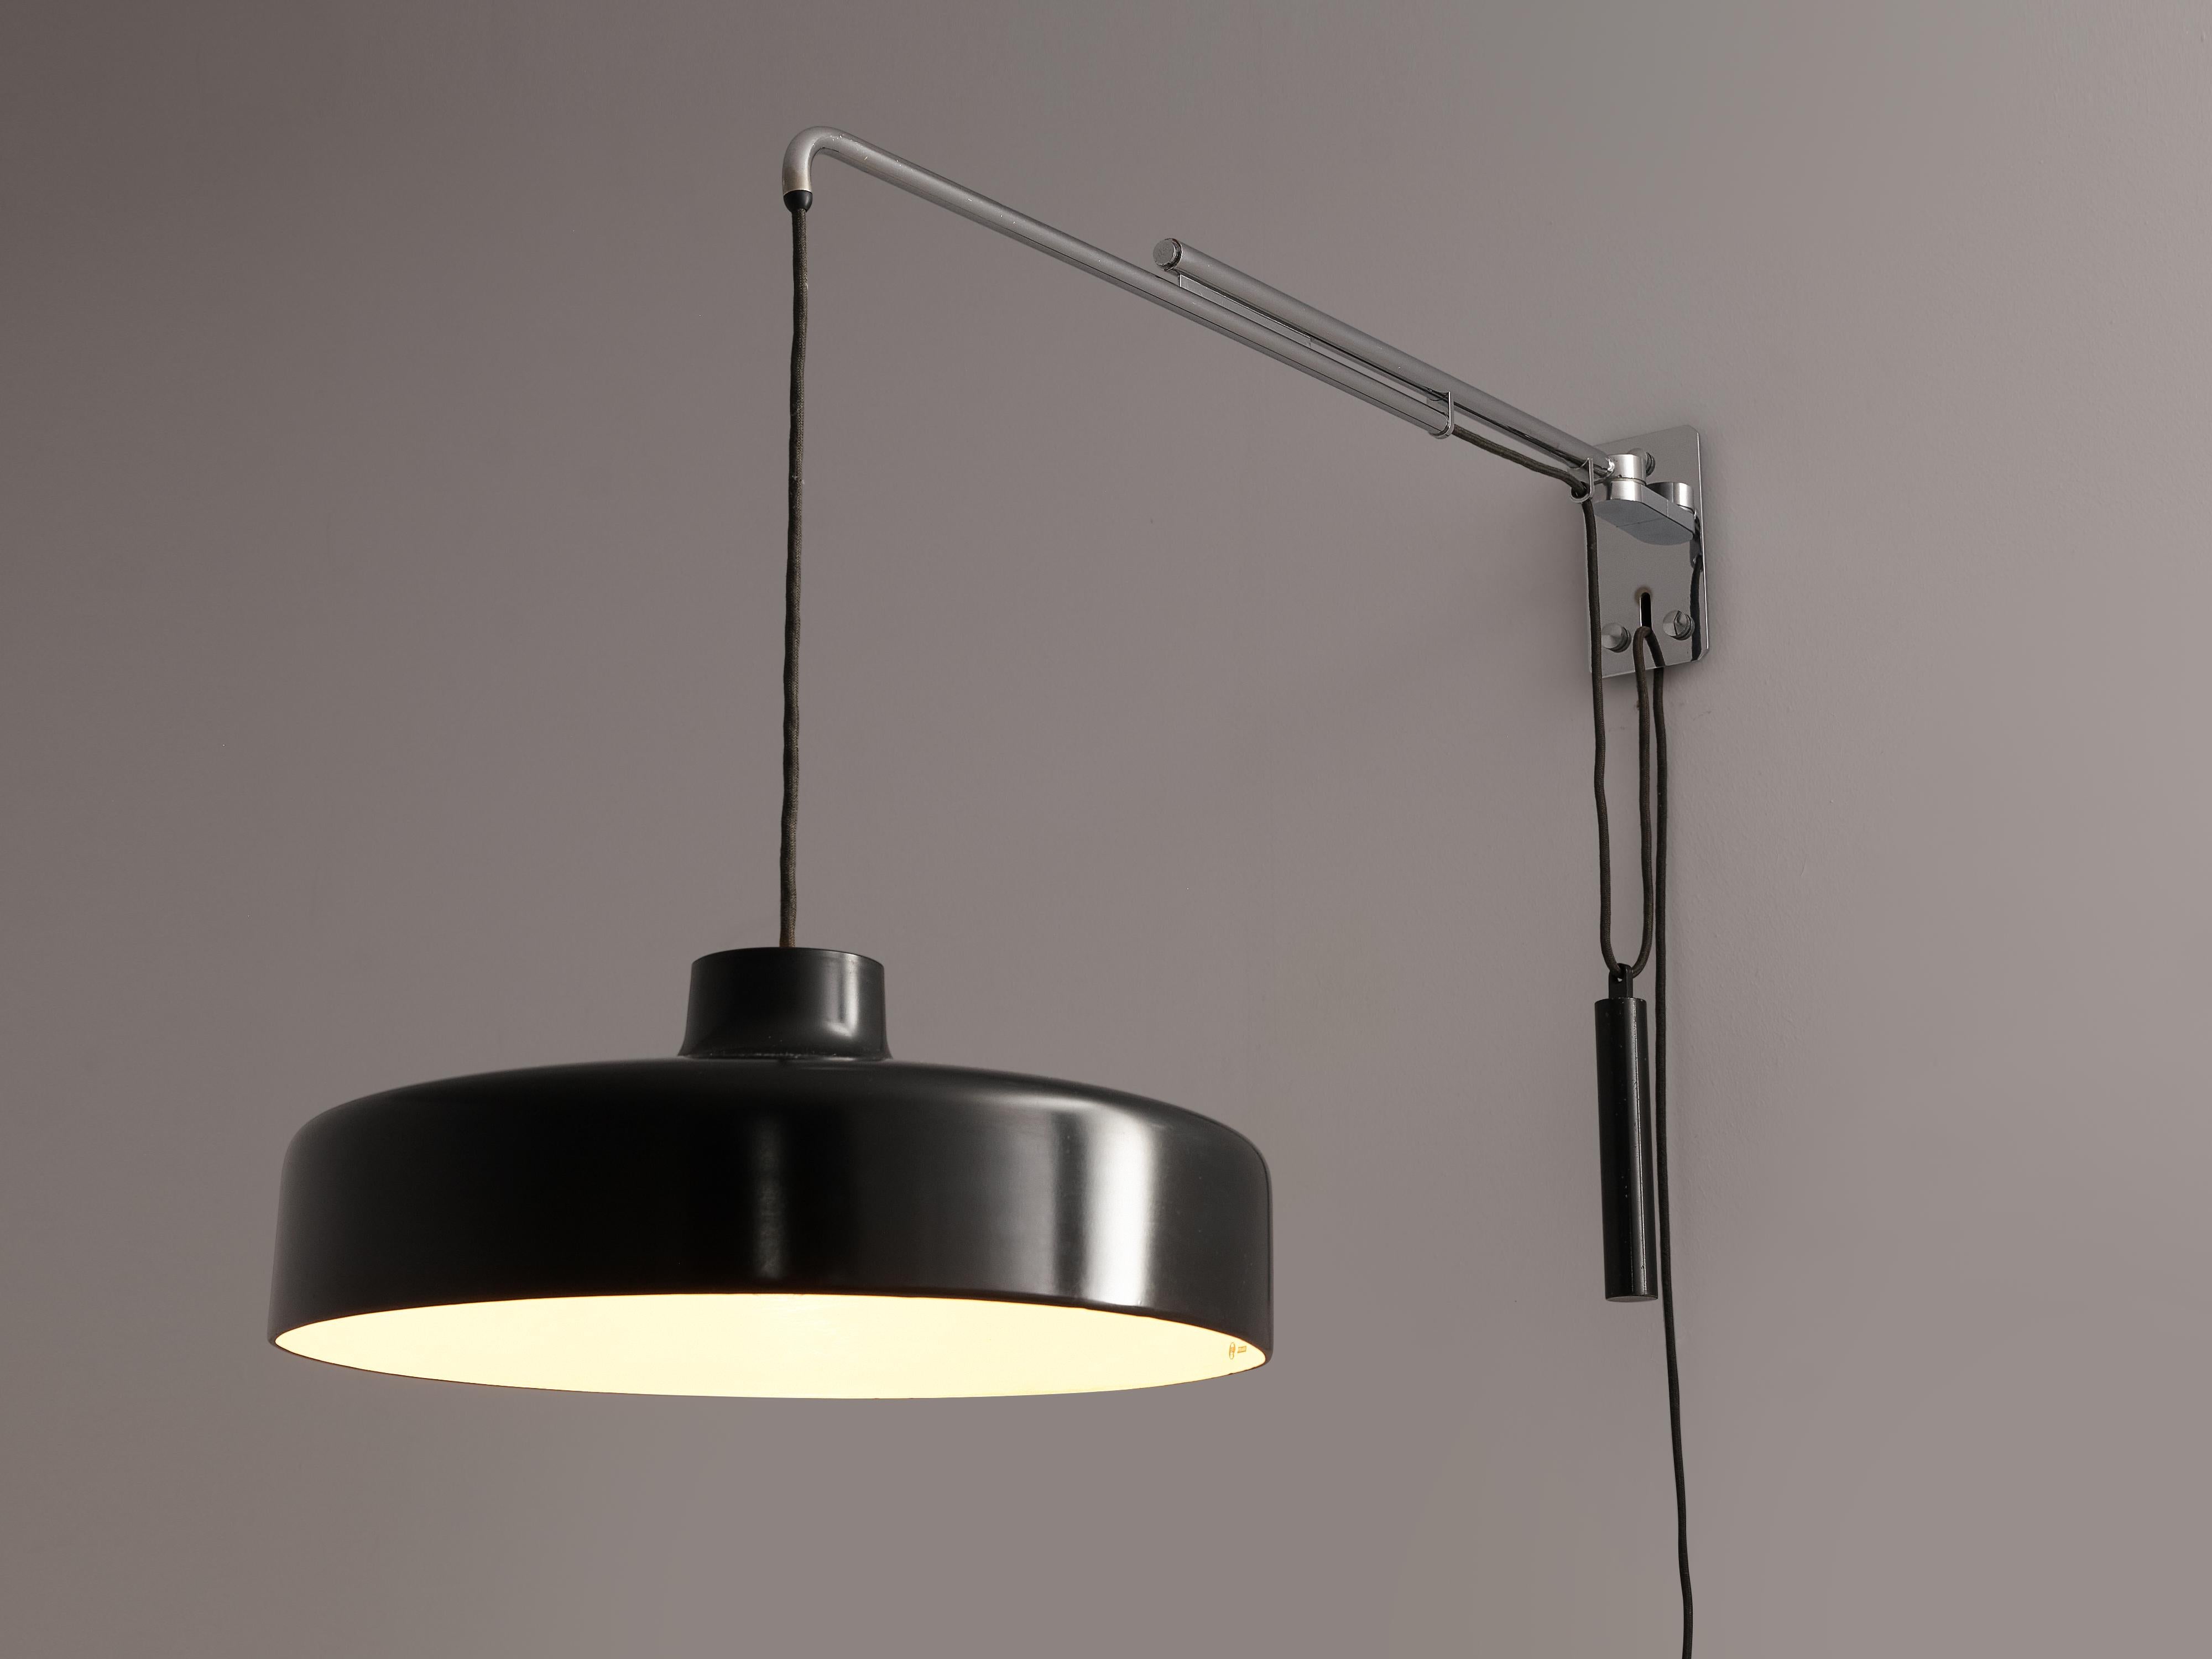 Gino Sarfatti for Arteluce, '194/N' wall-mounted pendant lamp, metal, wire, Italy, 1950 
 
This pendant lamp with extendible arm is mounted to the wall. With the counterweight the black shade can easily be adjusted in height. On the white inside the